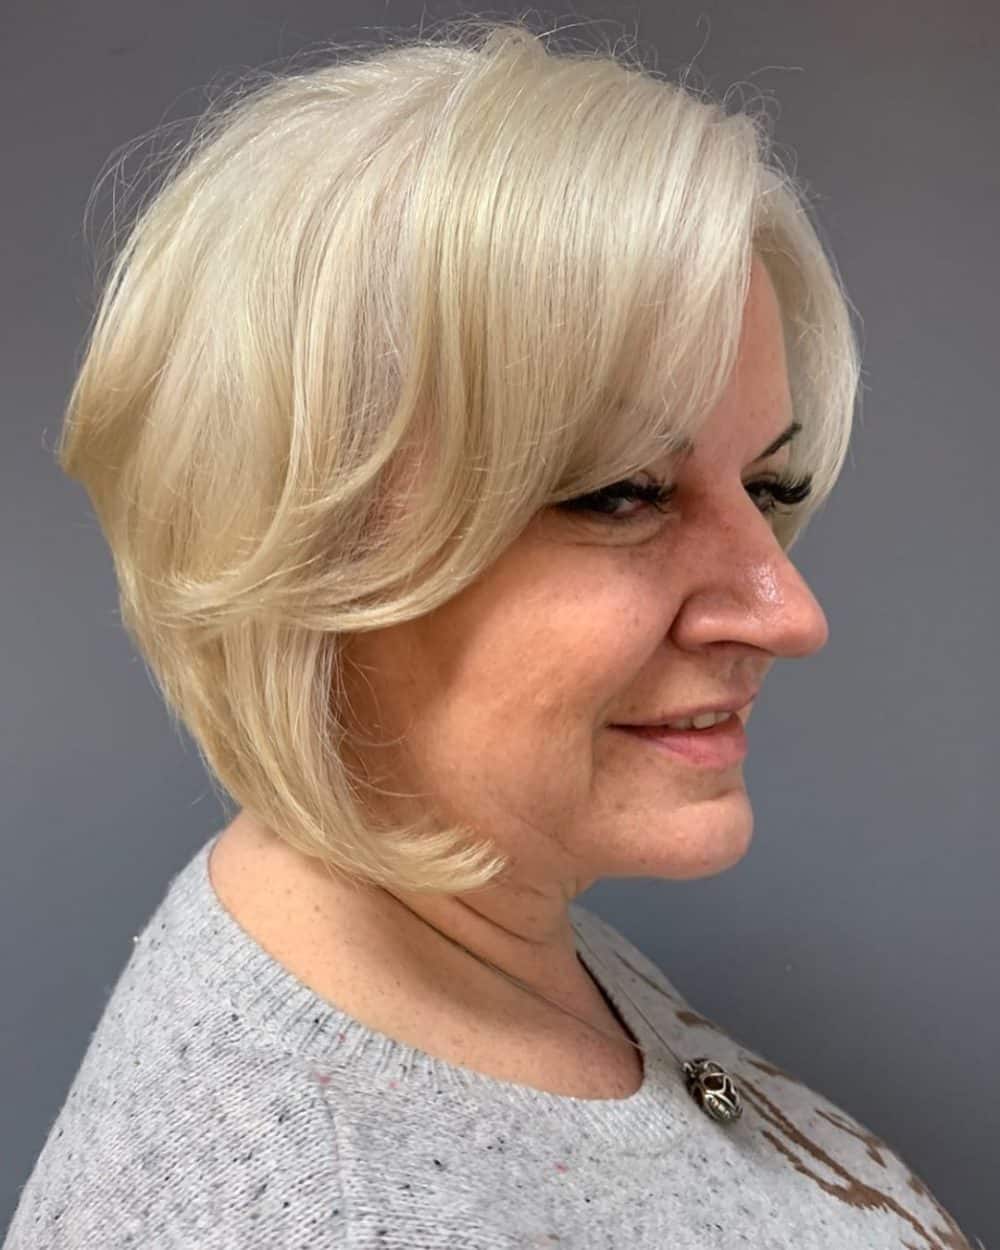 28 Slimming Short Hairstyles for Women Over 50 with Round Faces